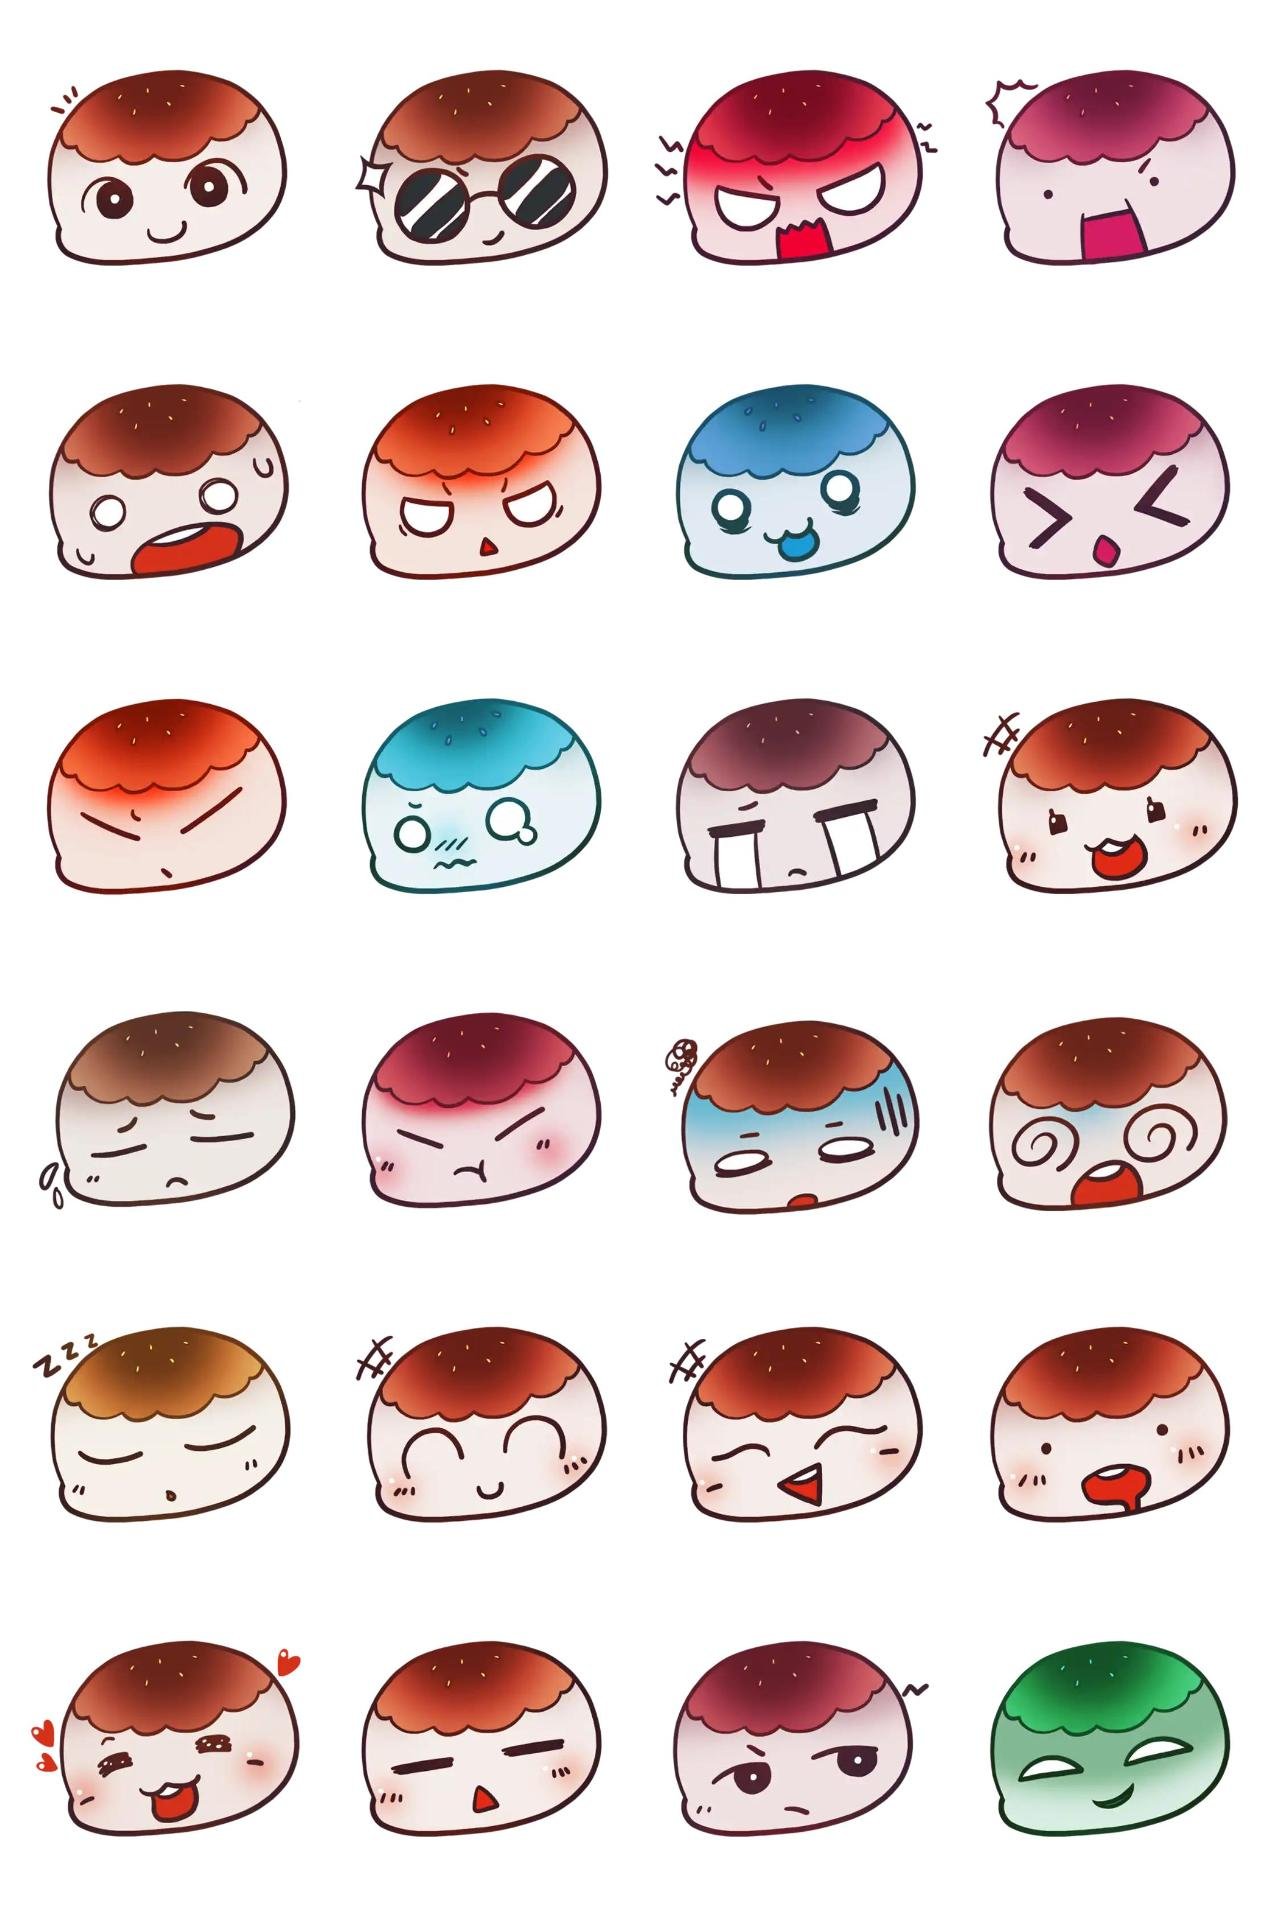 Cute round boy Animation/Cartoon,People sticker pack for Whatsapp, Telegram, Signal, and others chatting and message apps